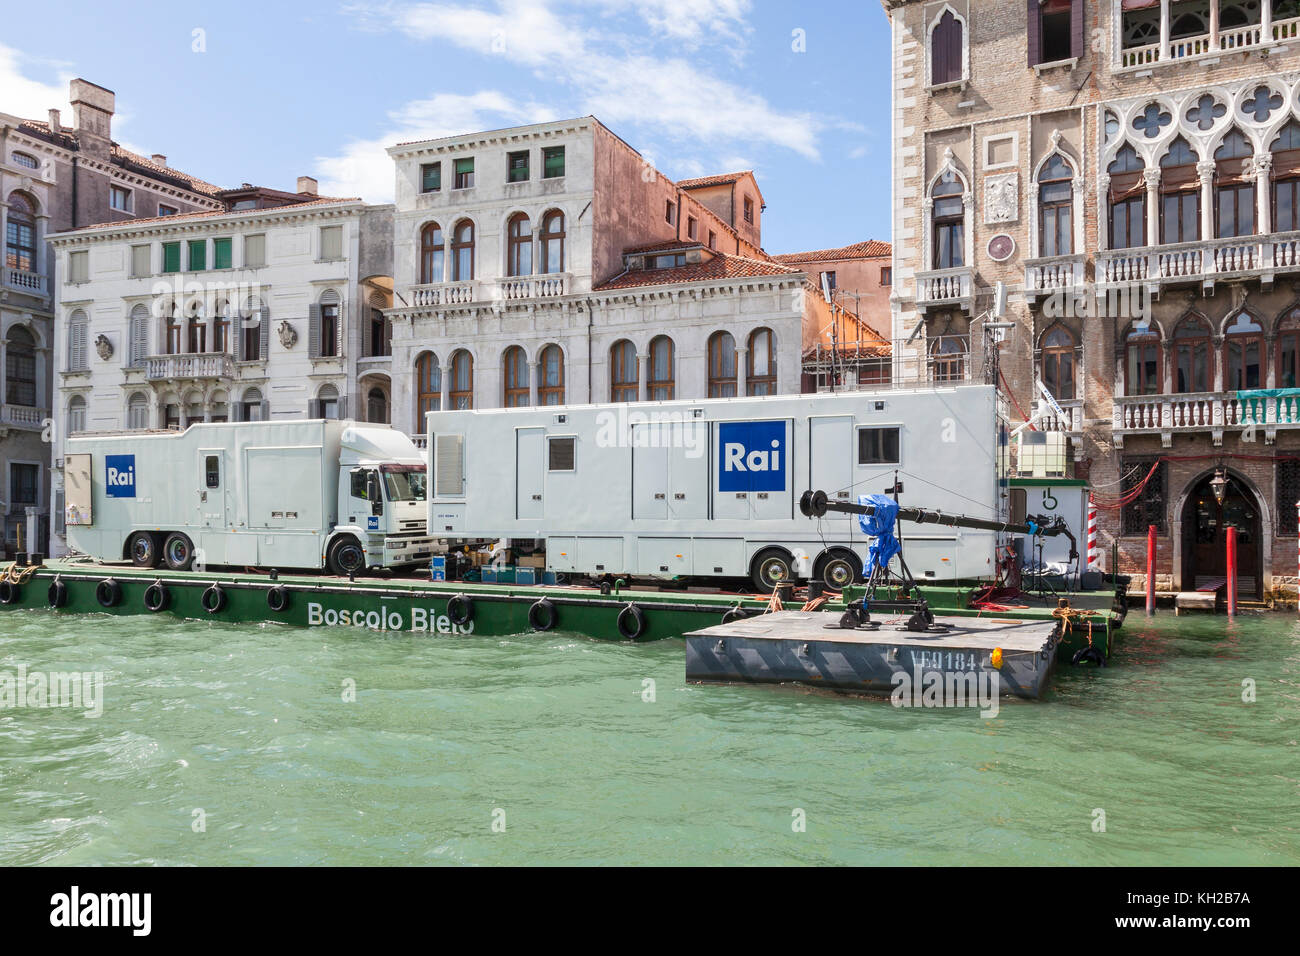 Two Italian  RAI television trucks  and equiment on floating pontoons in the Grand Canal, Venice, Italy ready for broadcasting an event Stock Photo